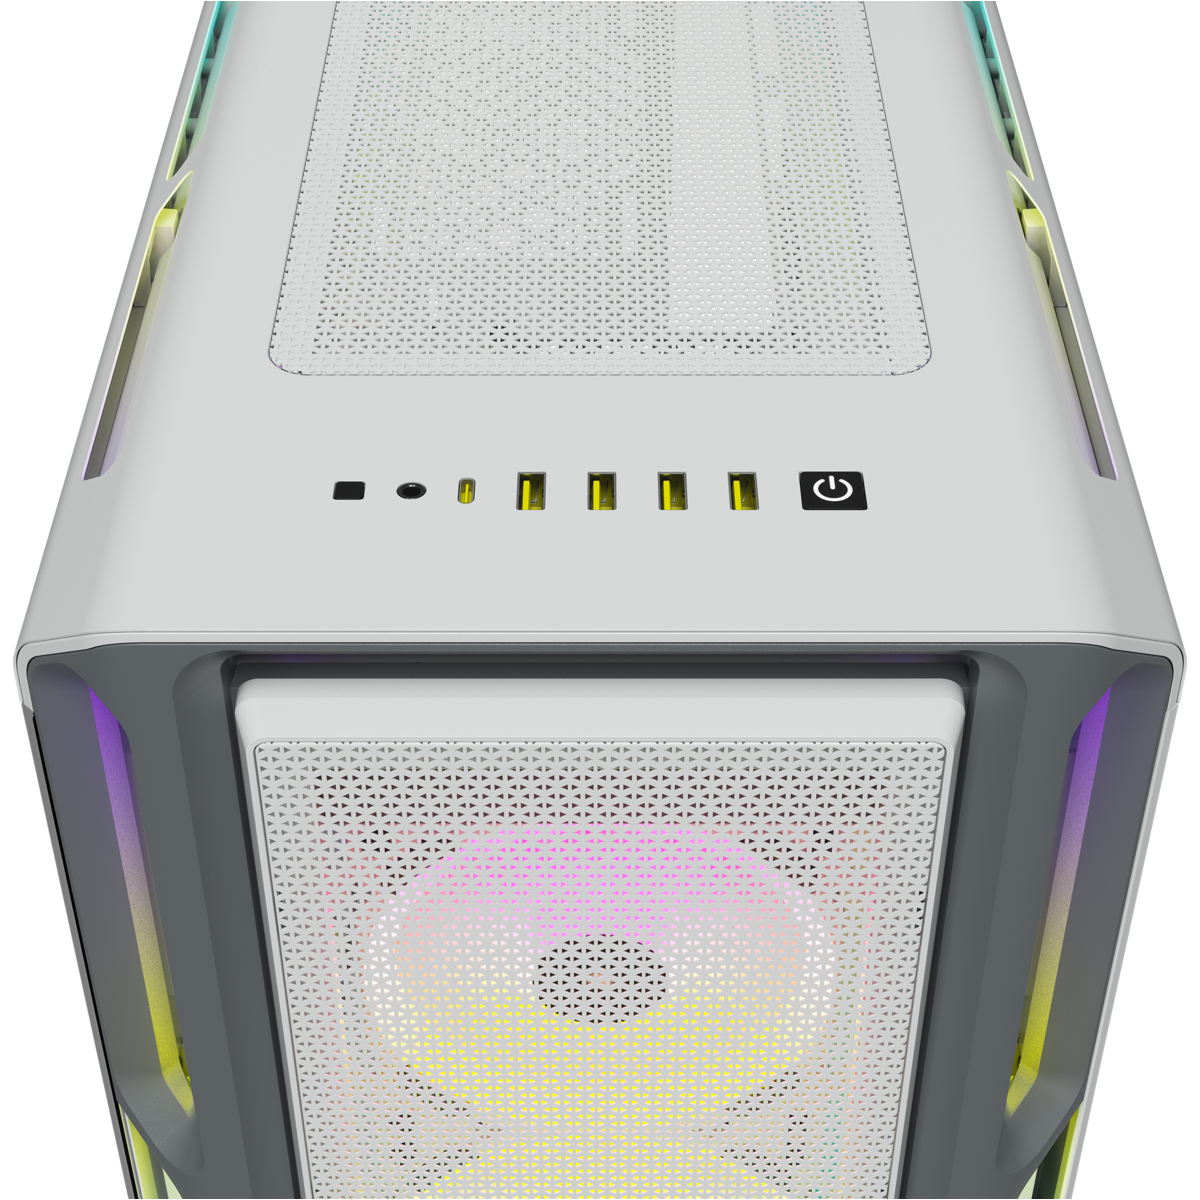 ONE GAMING PC ONEder PC RTX™ NVIDIA Microsoft GeForce 64 11 Home, Gaming-PC powered Core™ by MSI, 10 GB mit GB RAM, 1 TB 3080, i9 Prozessor, Windows SSD, Intel®